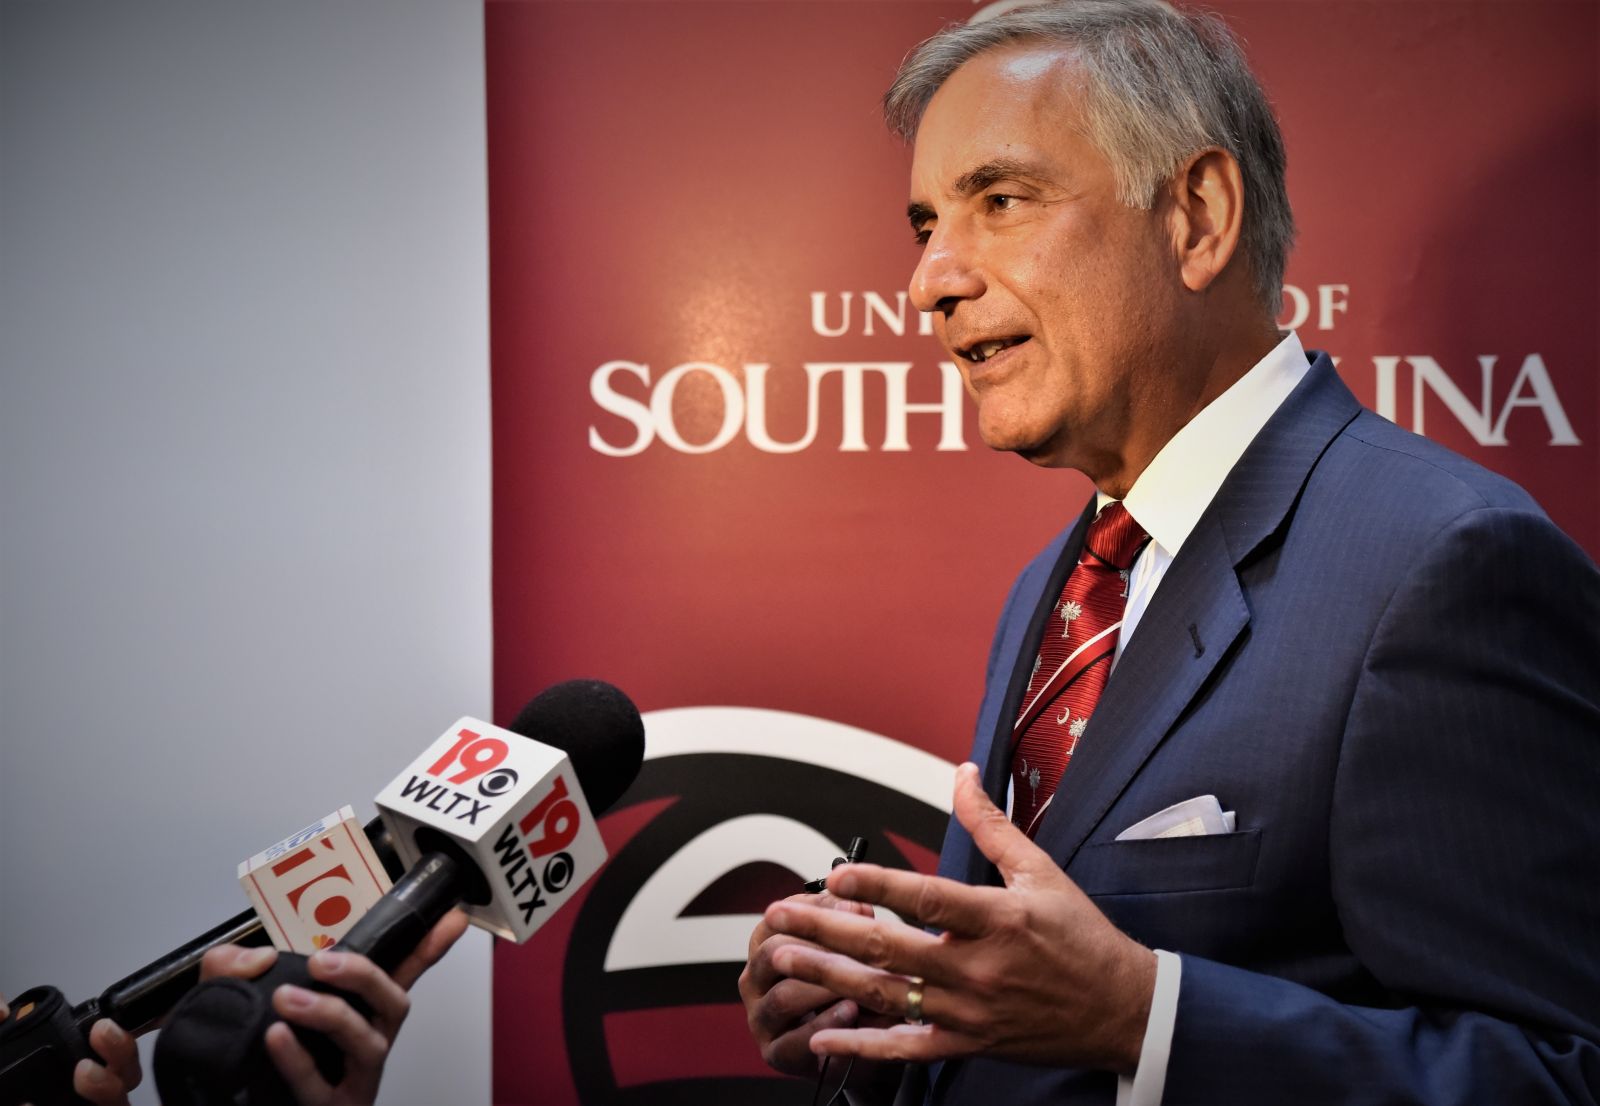 Harris Pastides is retiring after 10 years as president of the University of South Carolina. The process of finding his successor has not been a smooth one. (Photo/File)